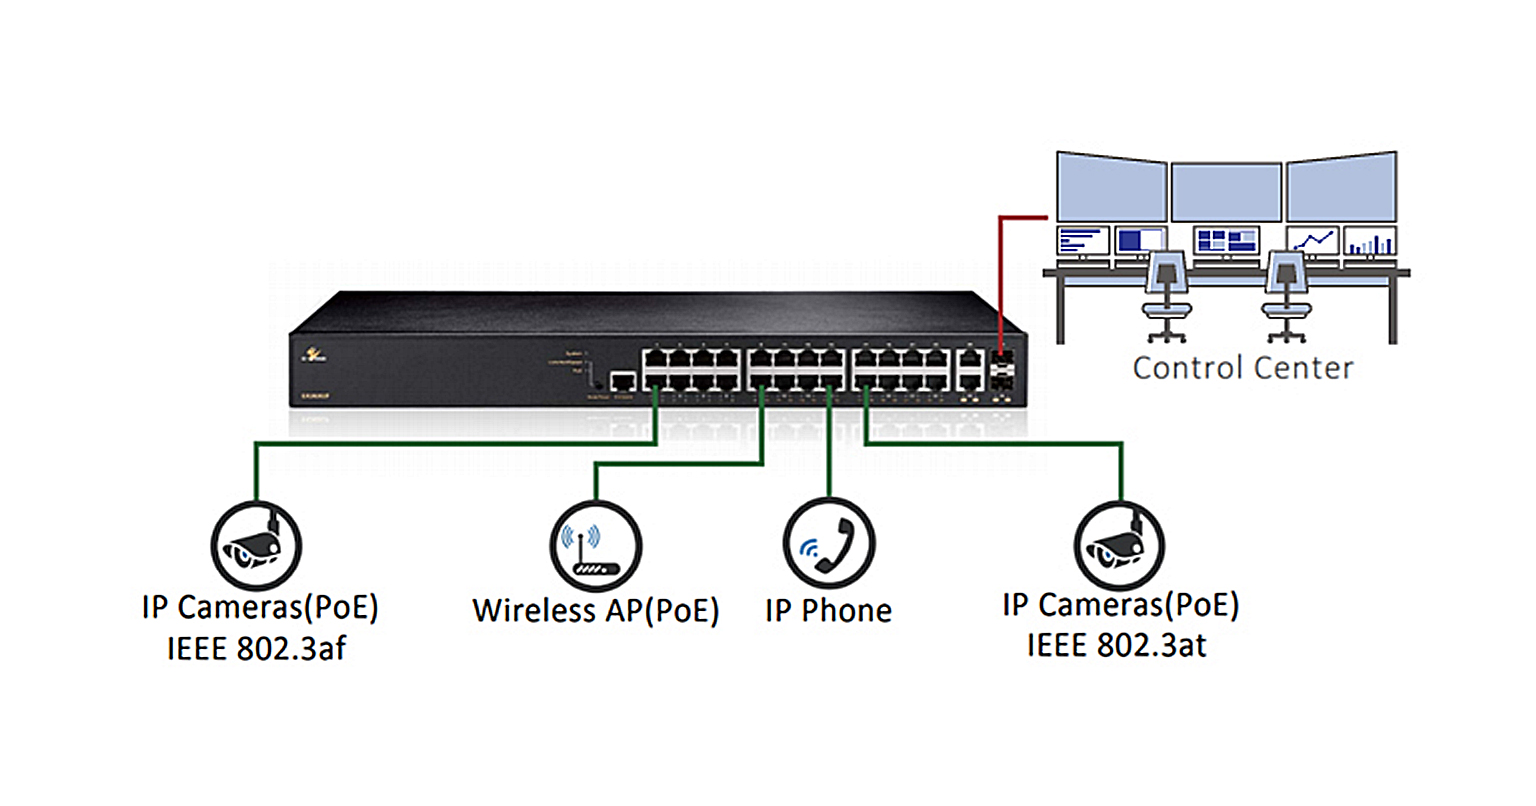 What is a poe switch and how to select it?